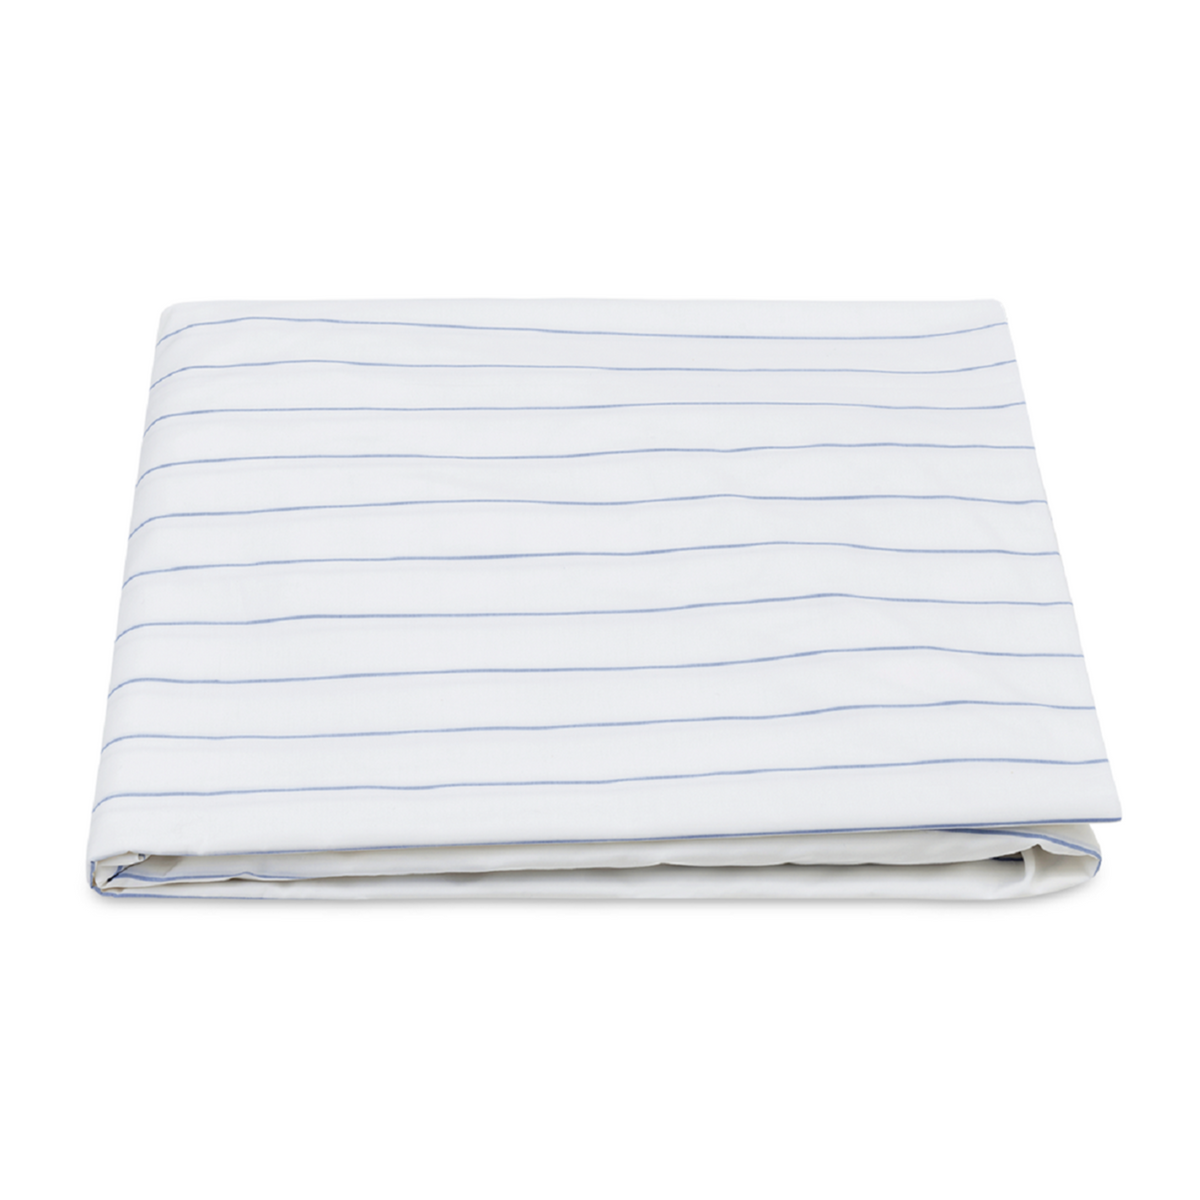 Folded Fitted Sheet of Matouk Amalfi Bedding in Hazy Blue Color